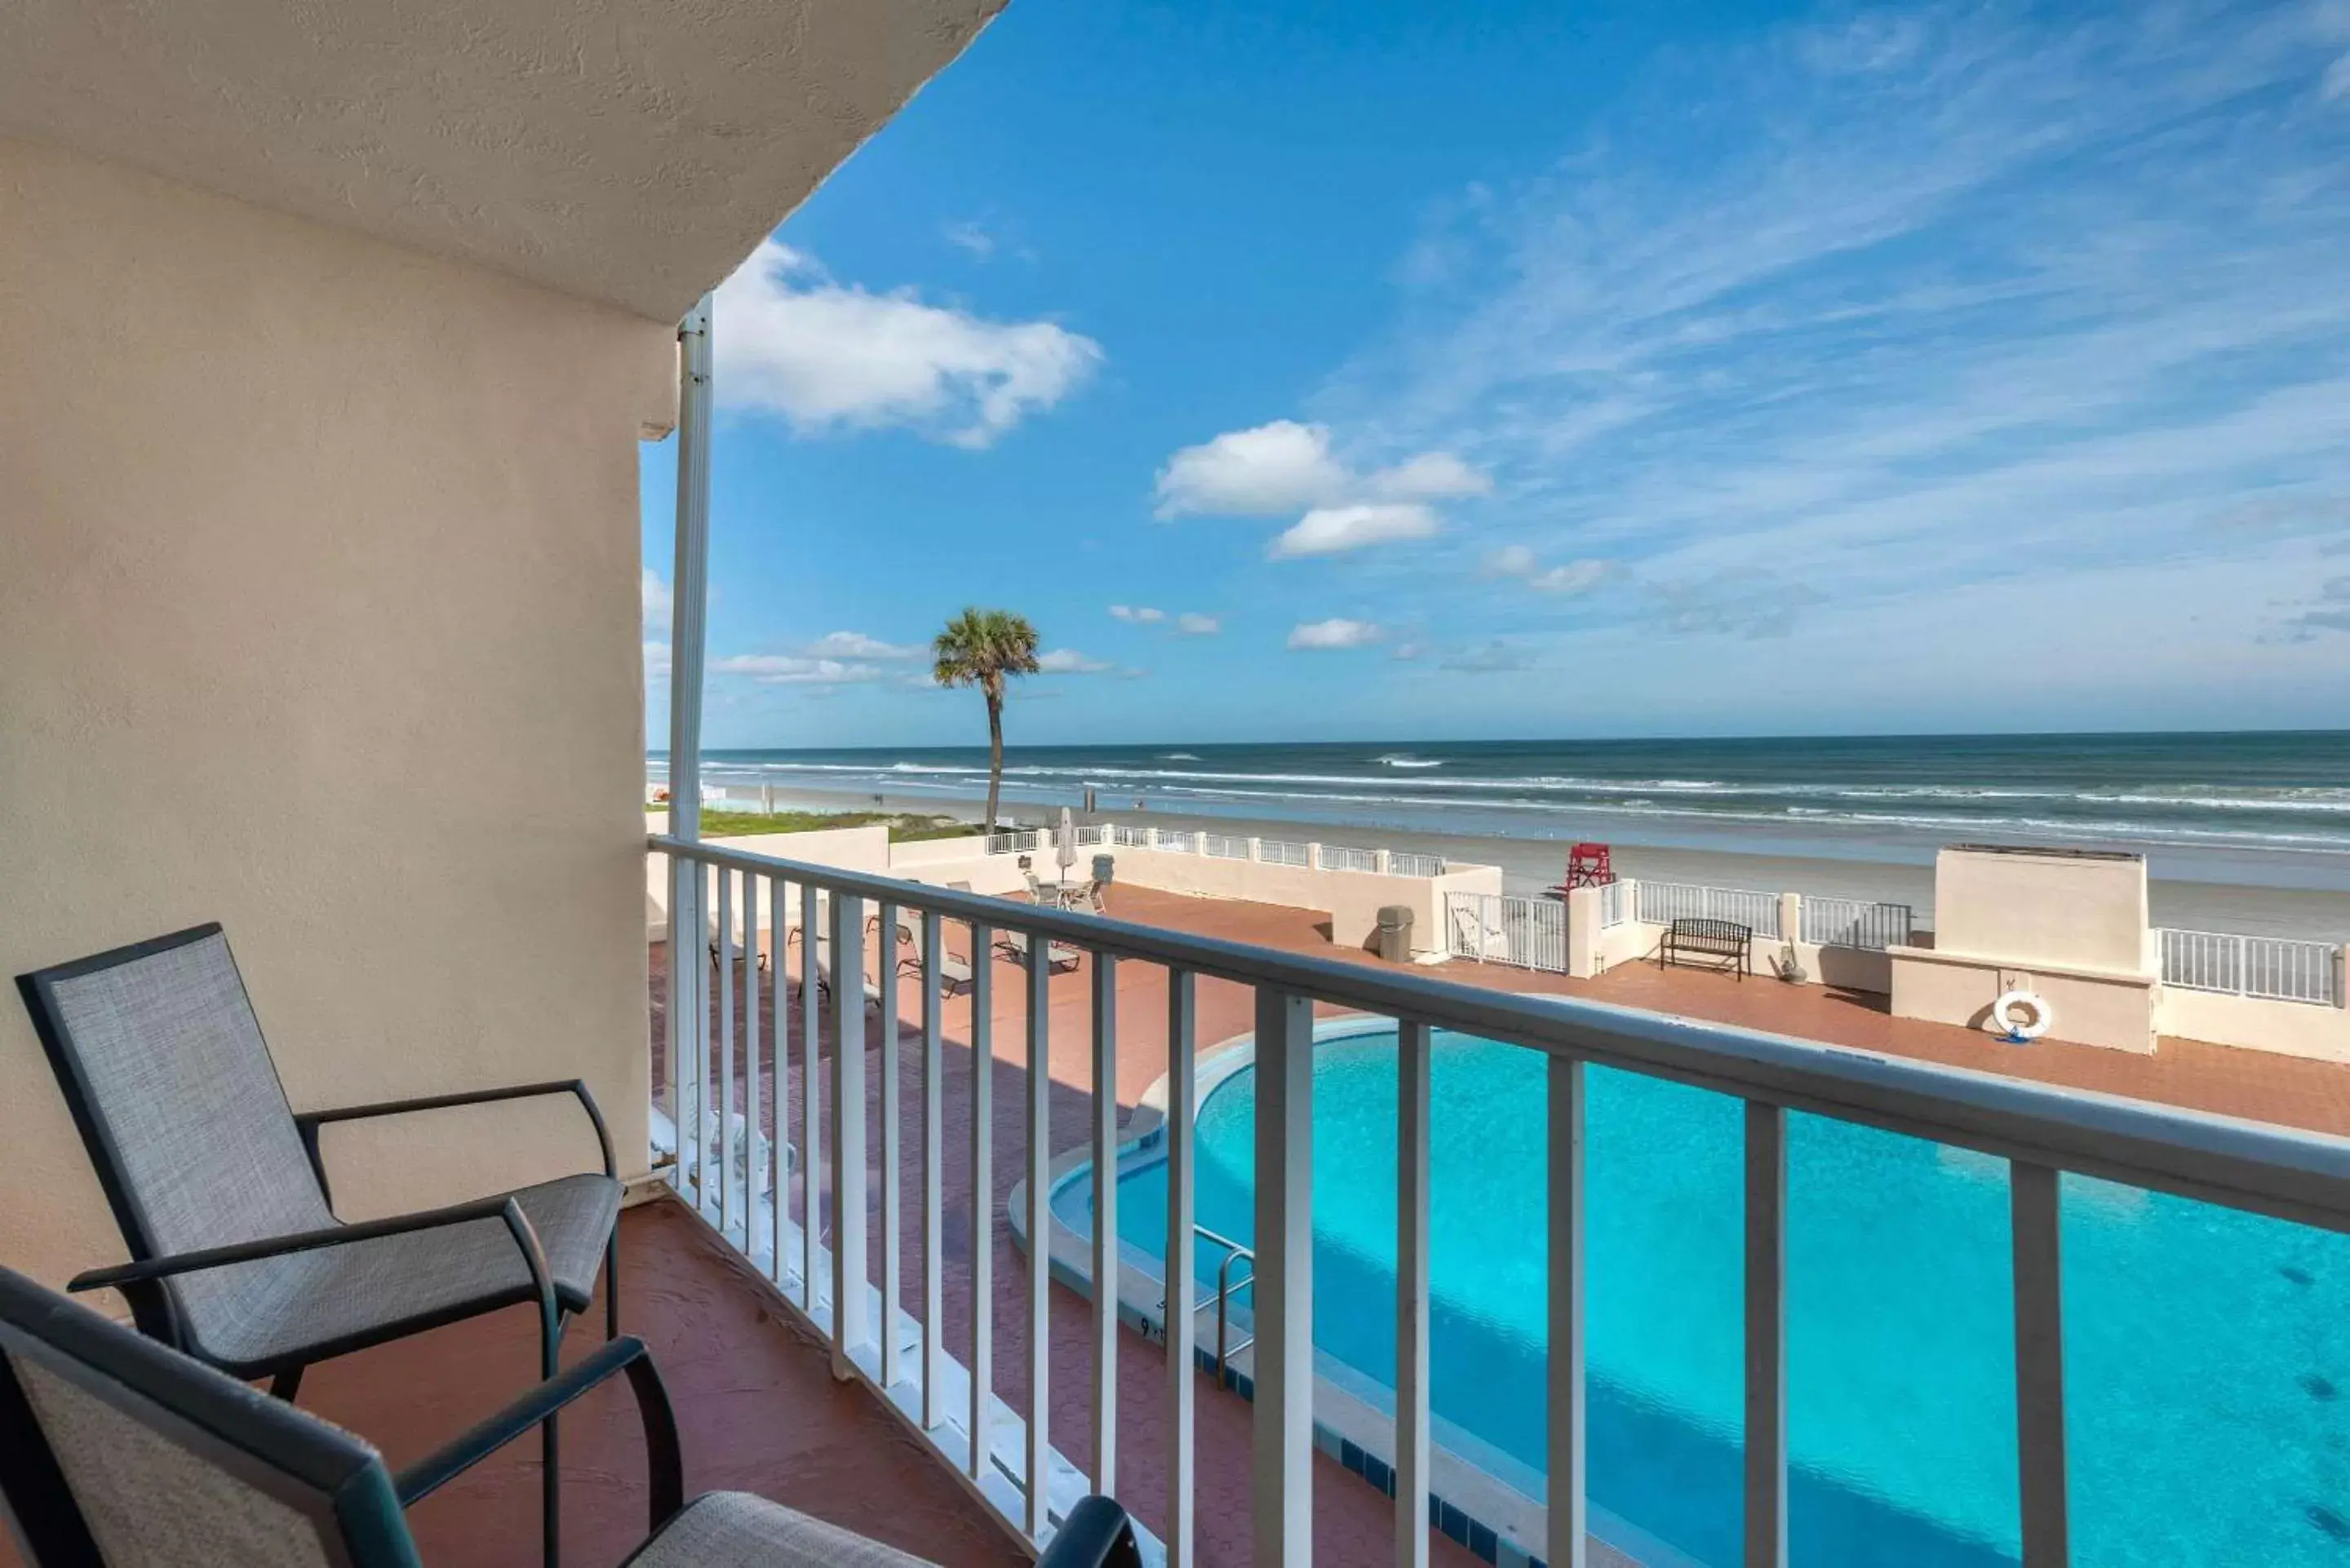 Property building, Pool View in Quality Inn Daytona Beach Oceanfront